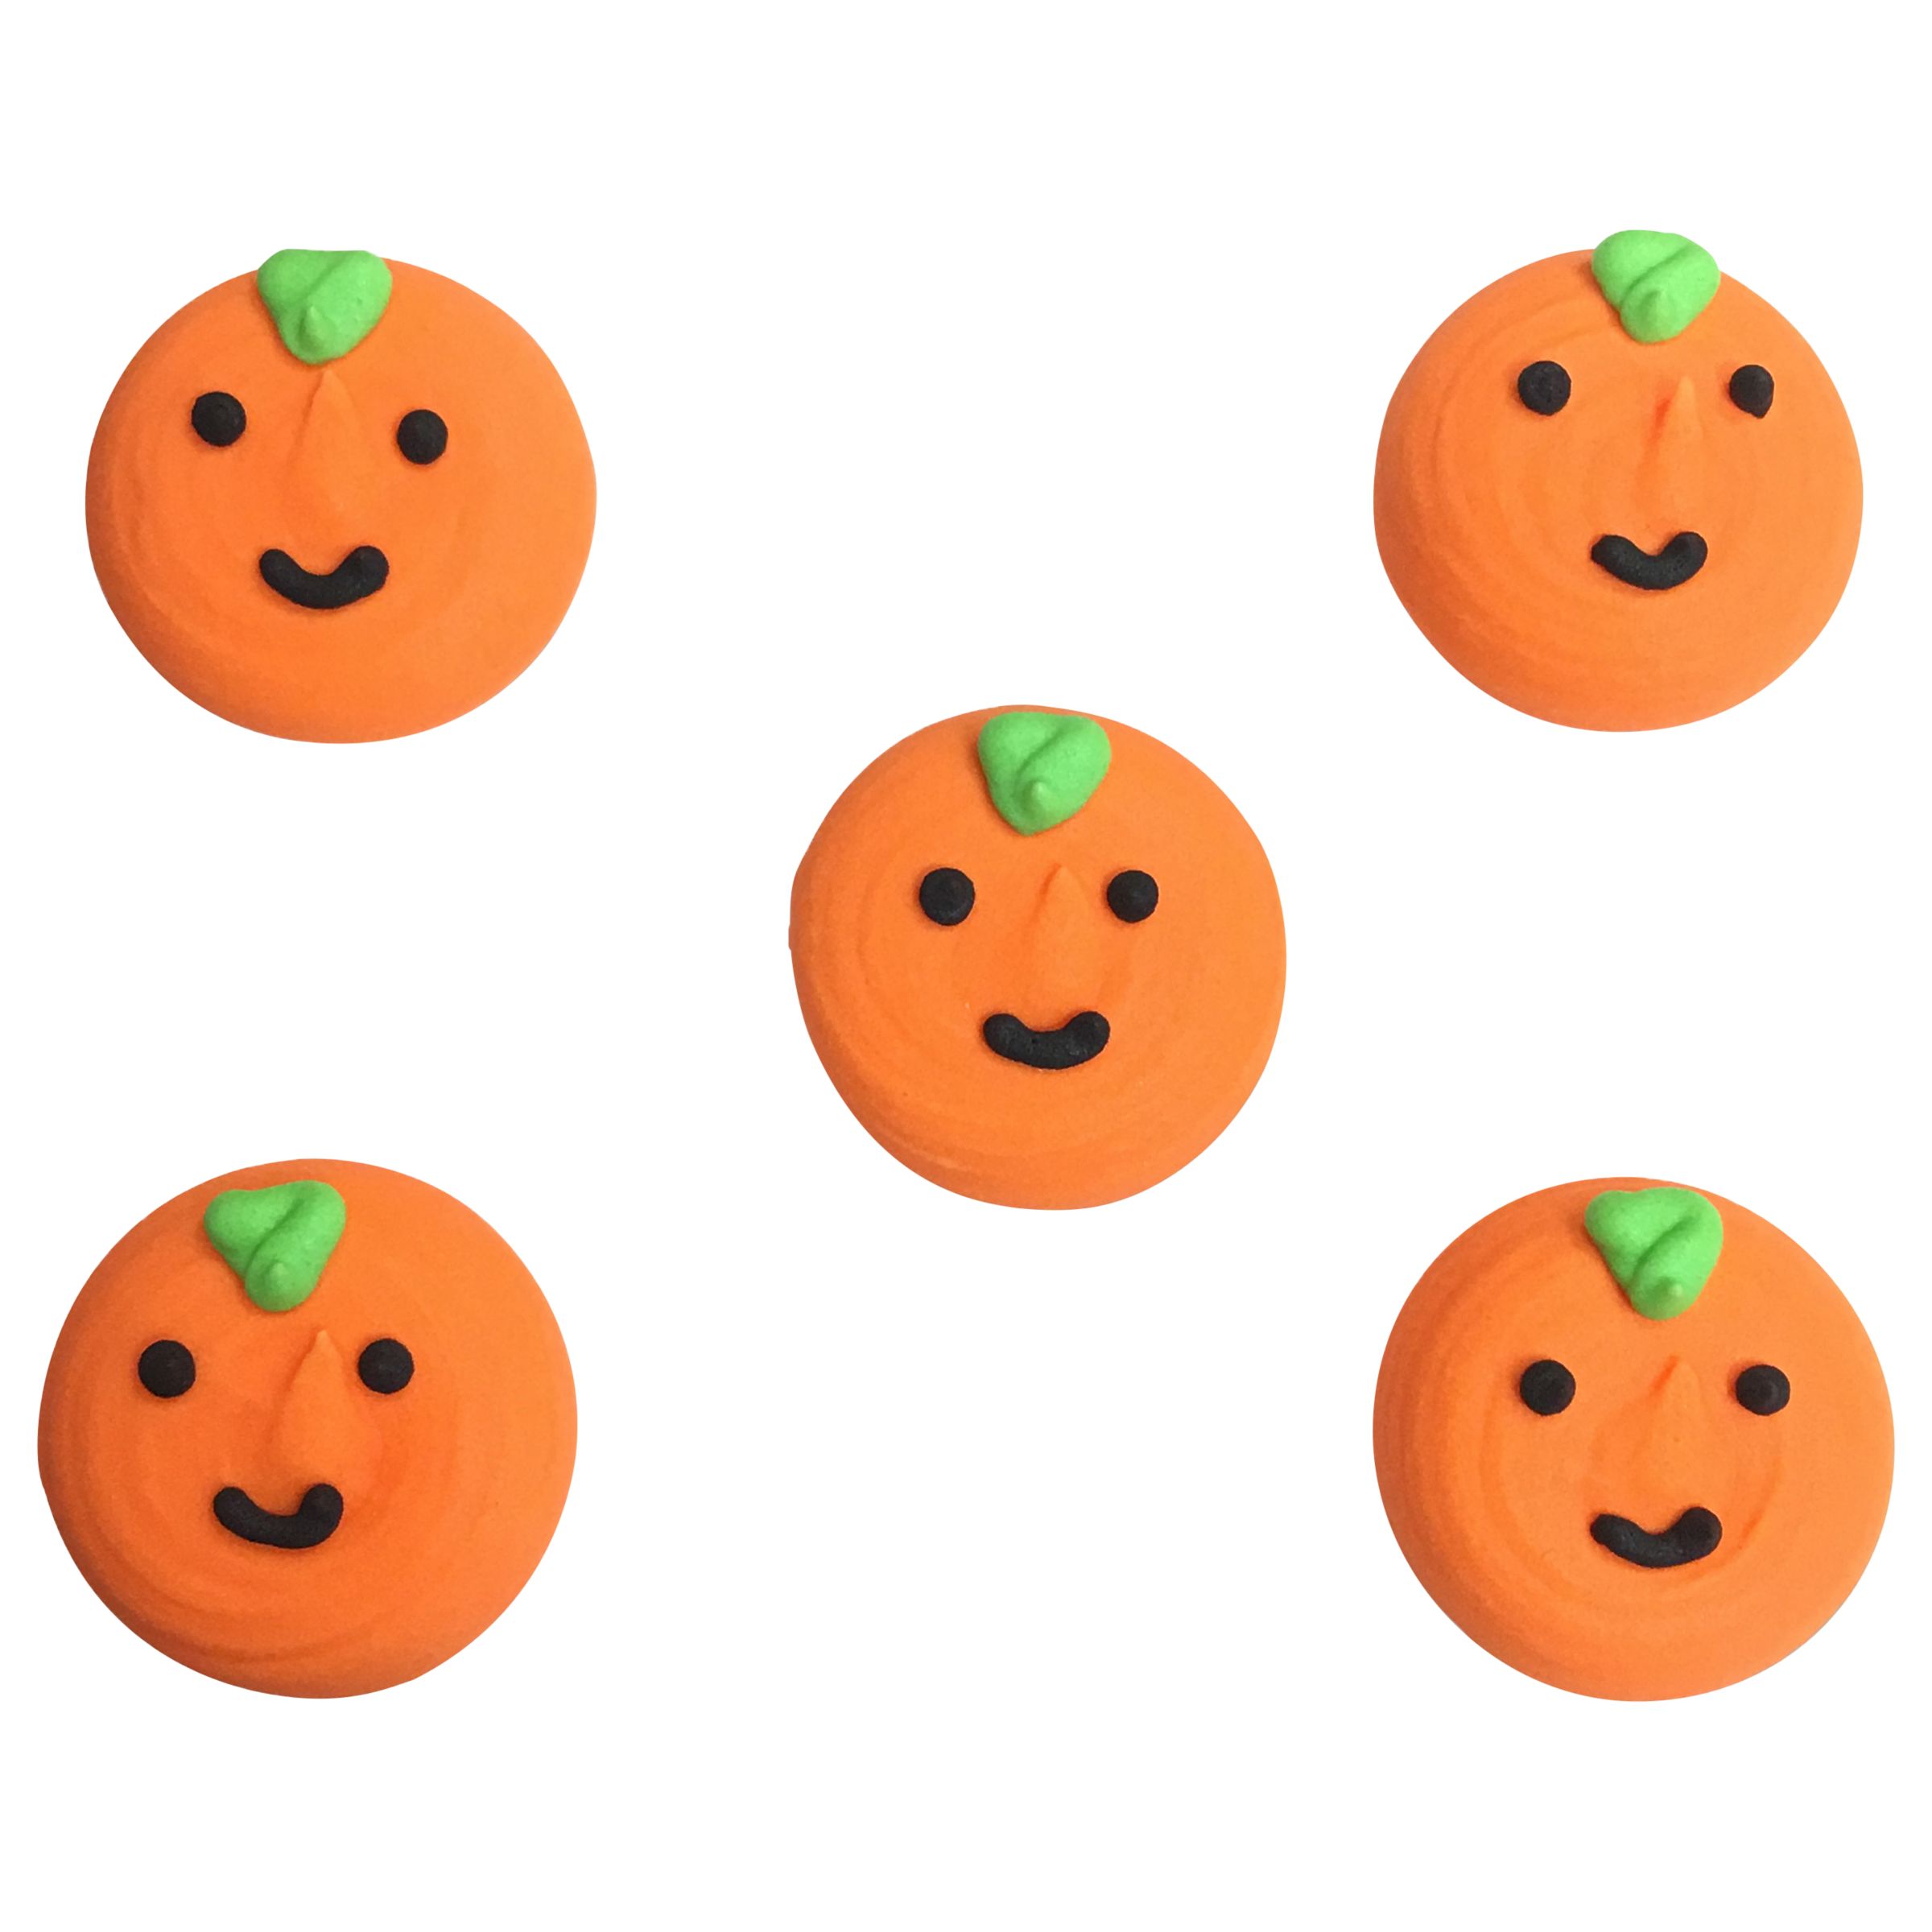 Creative Party Sugarcraft Halloween Pumpkin Cake Toppers, Pack of 5